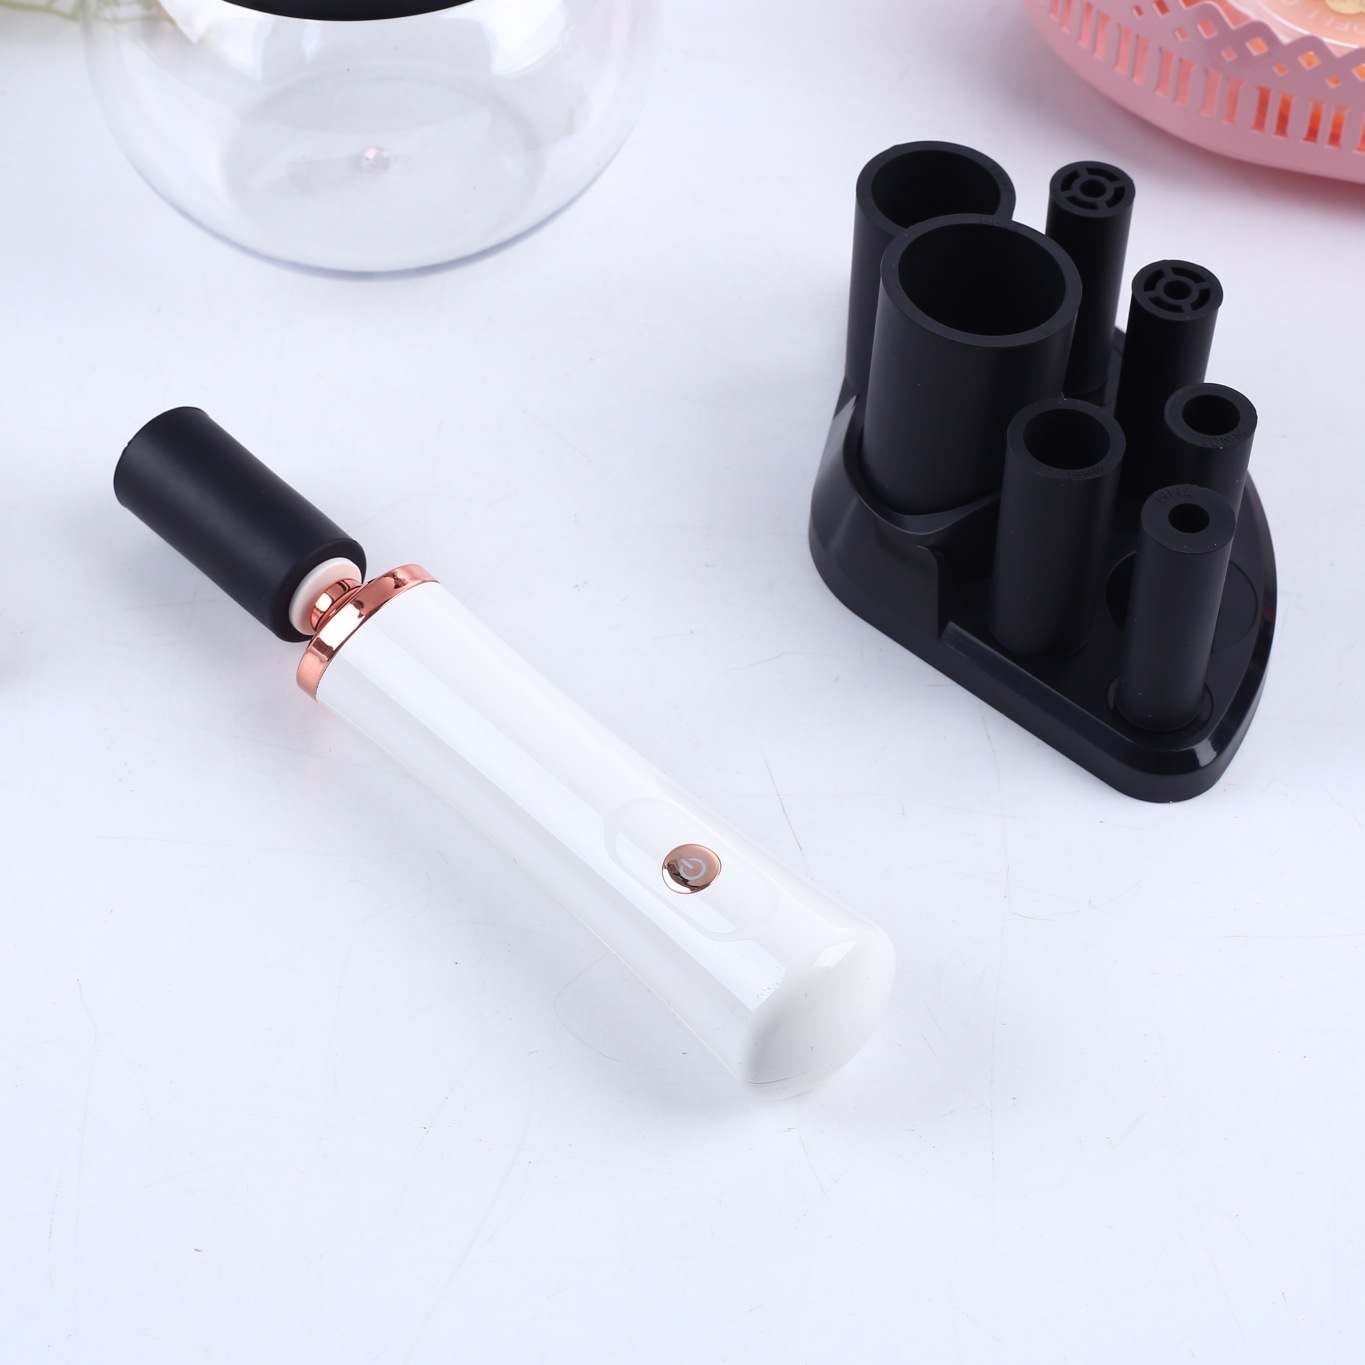 Makeup Brush Cleaner Cleaner Beauty Eyelashes Shaker Glue Wake Up Electric Makeup Brush Quick-drying Machine Scrubber